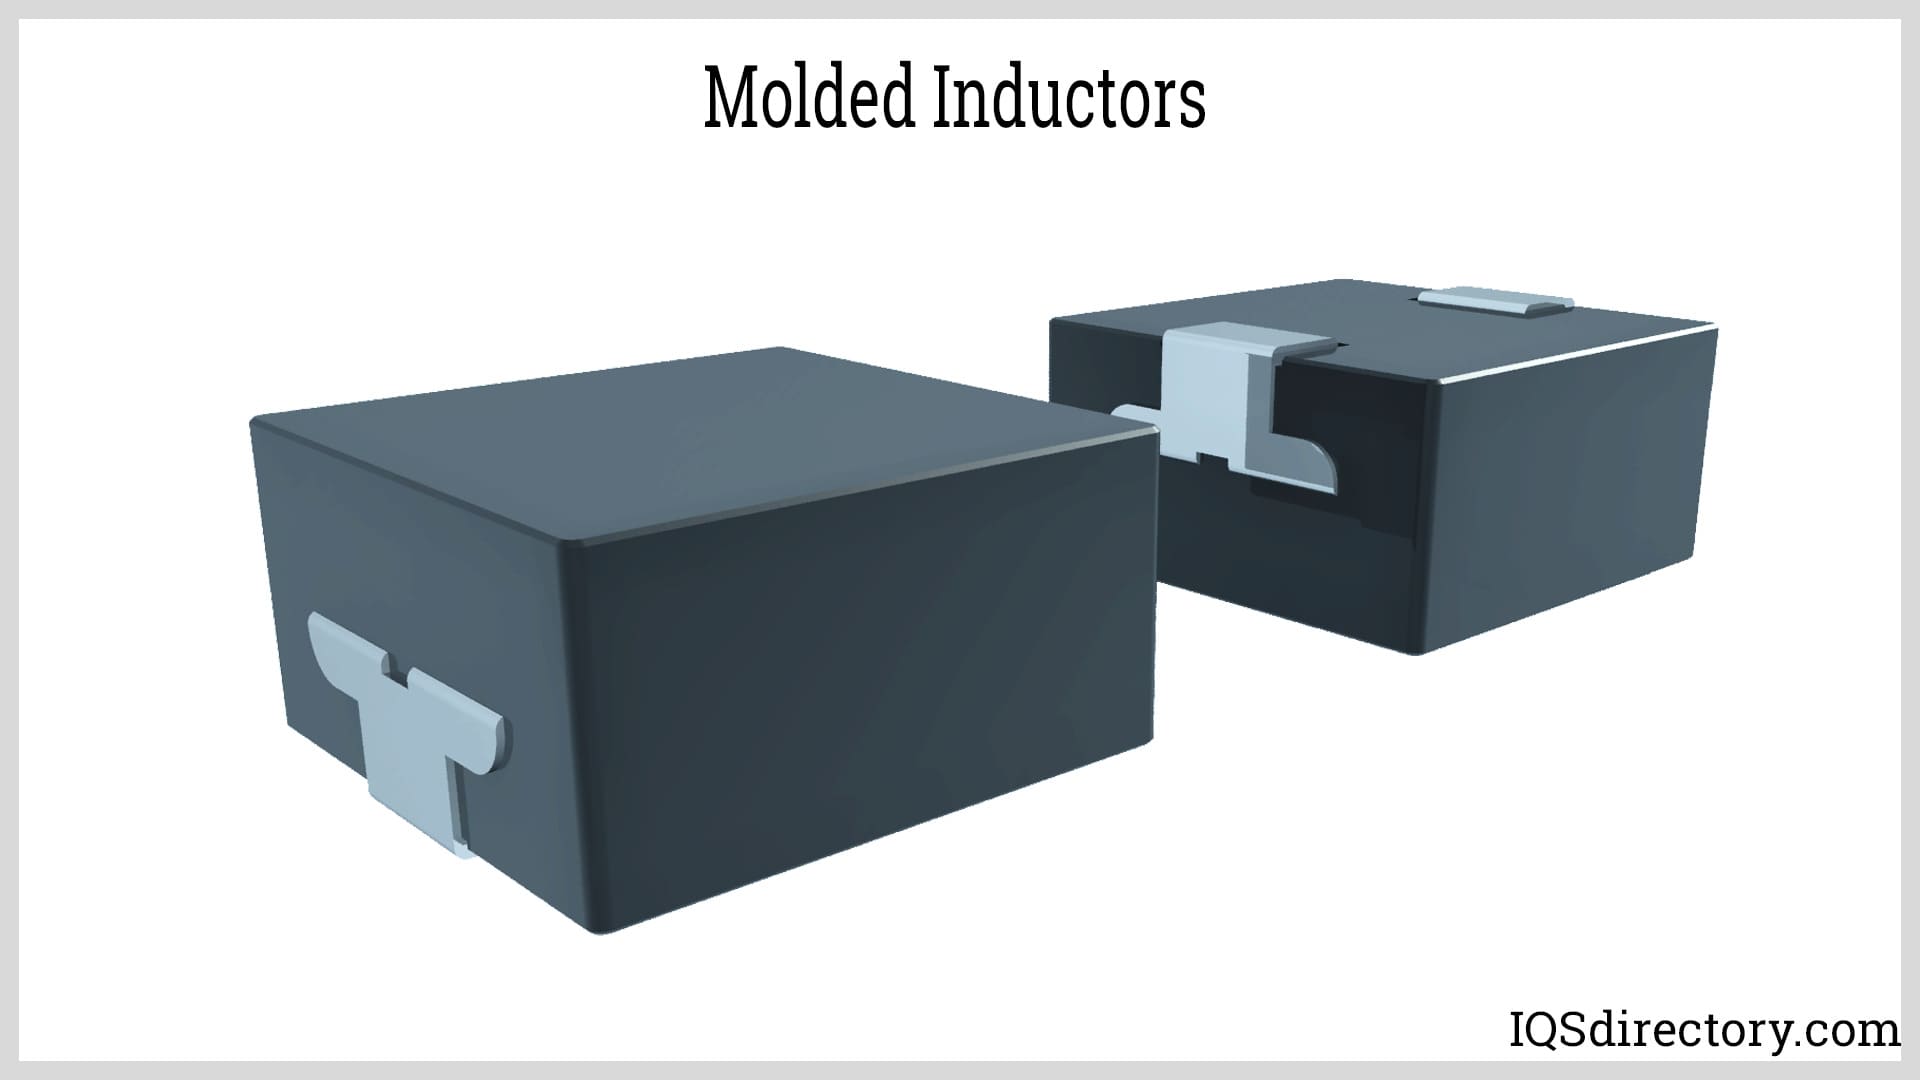 Molded Inductors